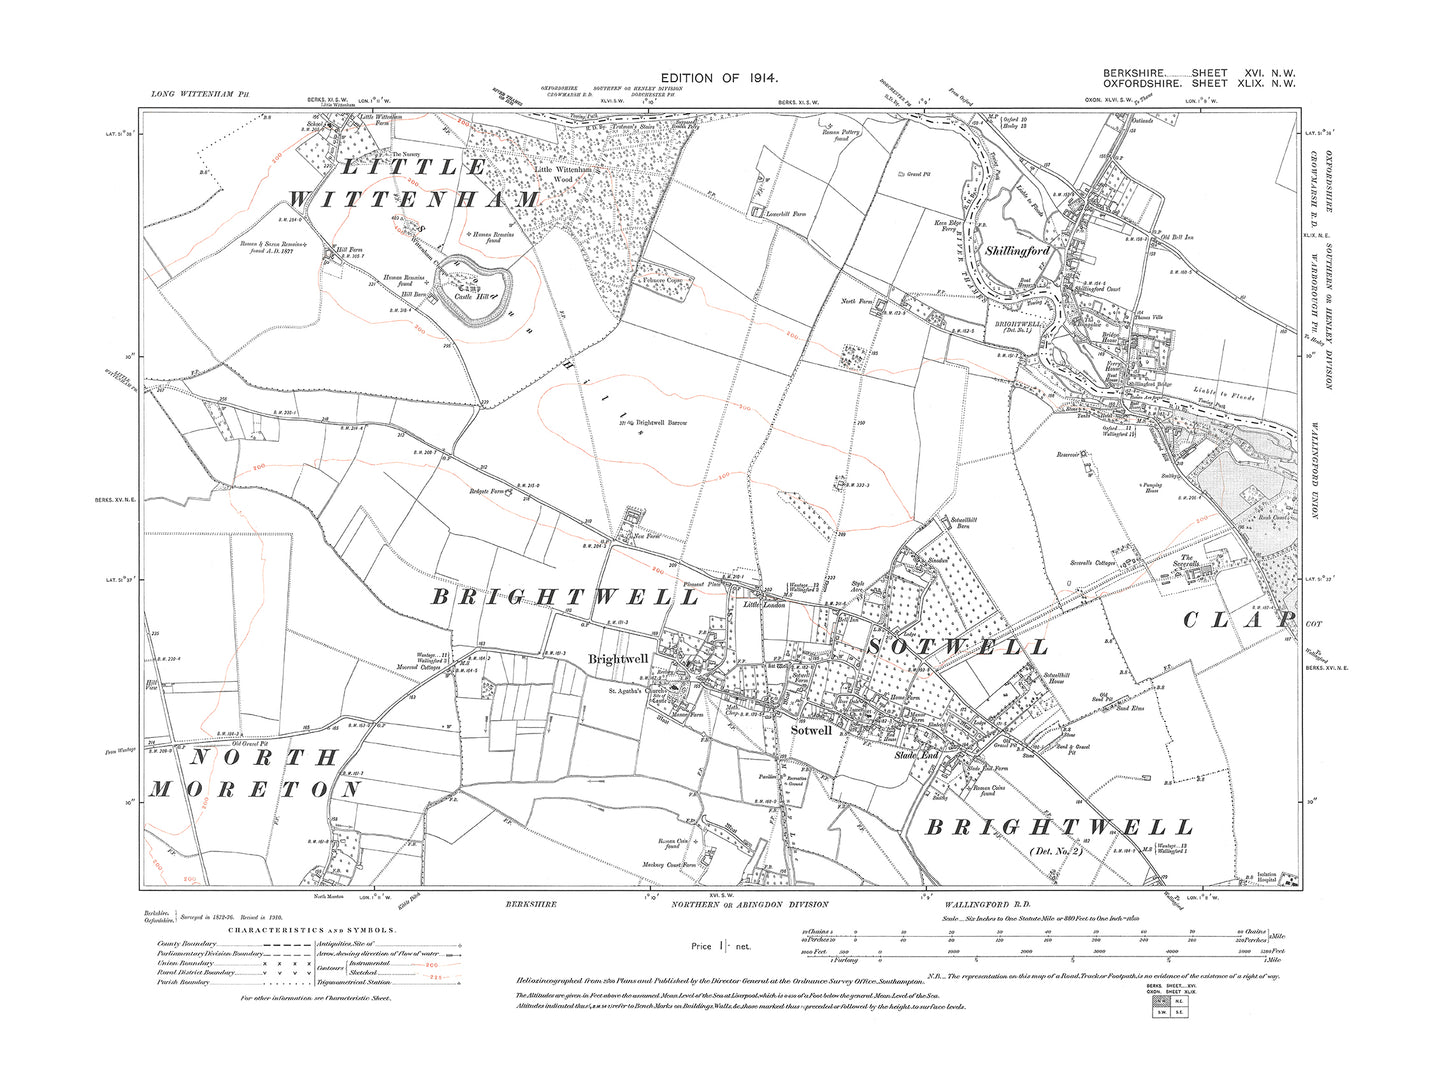 A 1914 map showing Brightwell, Sotwell in Berkshire - OS 1:10560 scale map, Berks 16NW